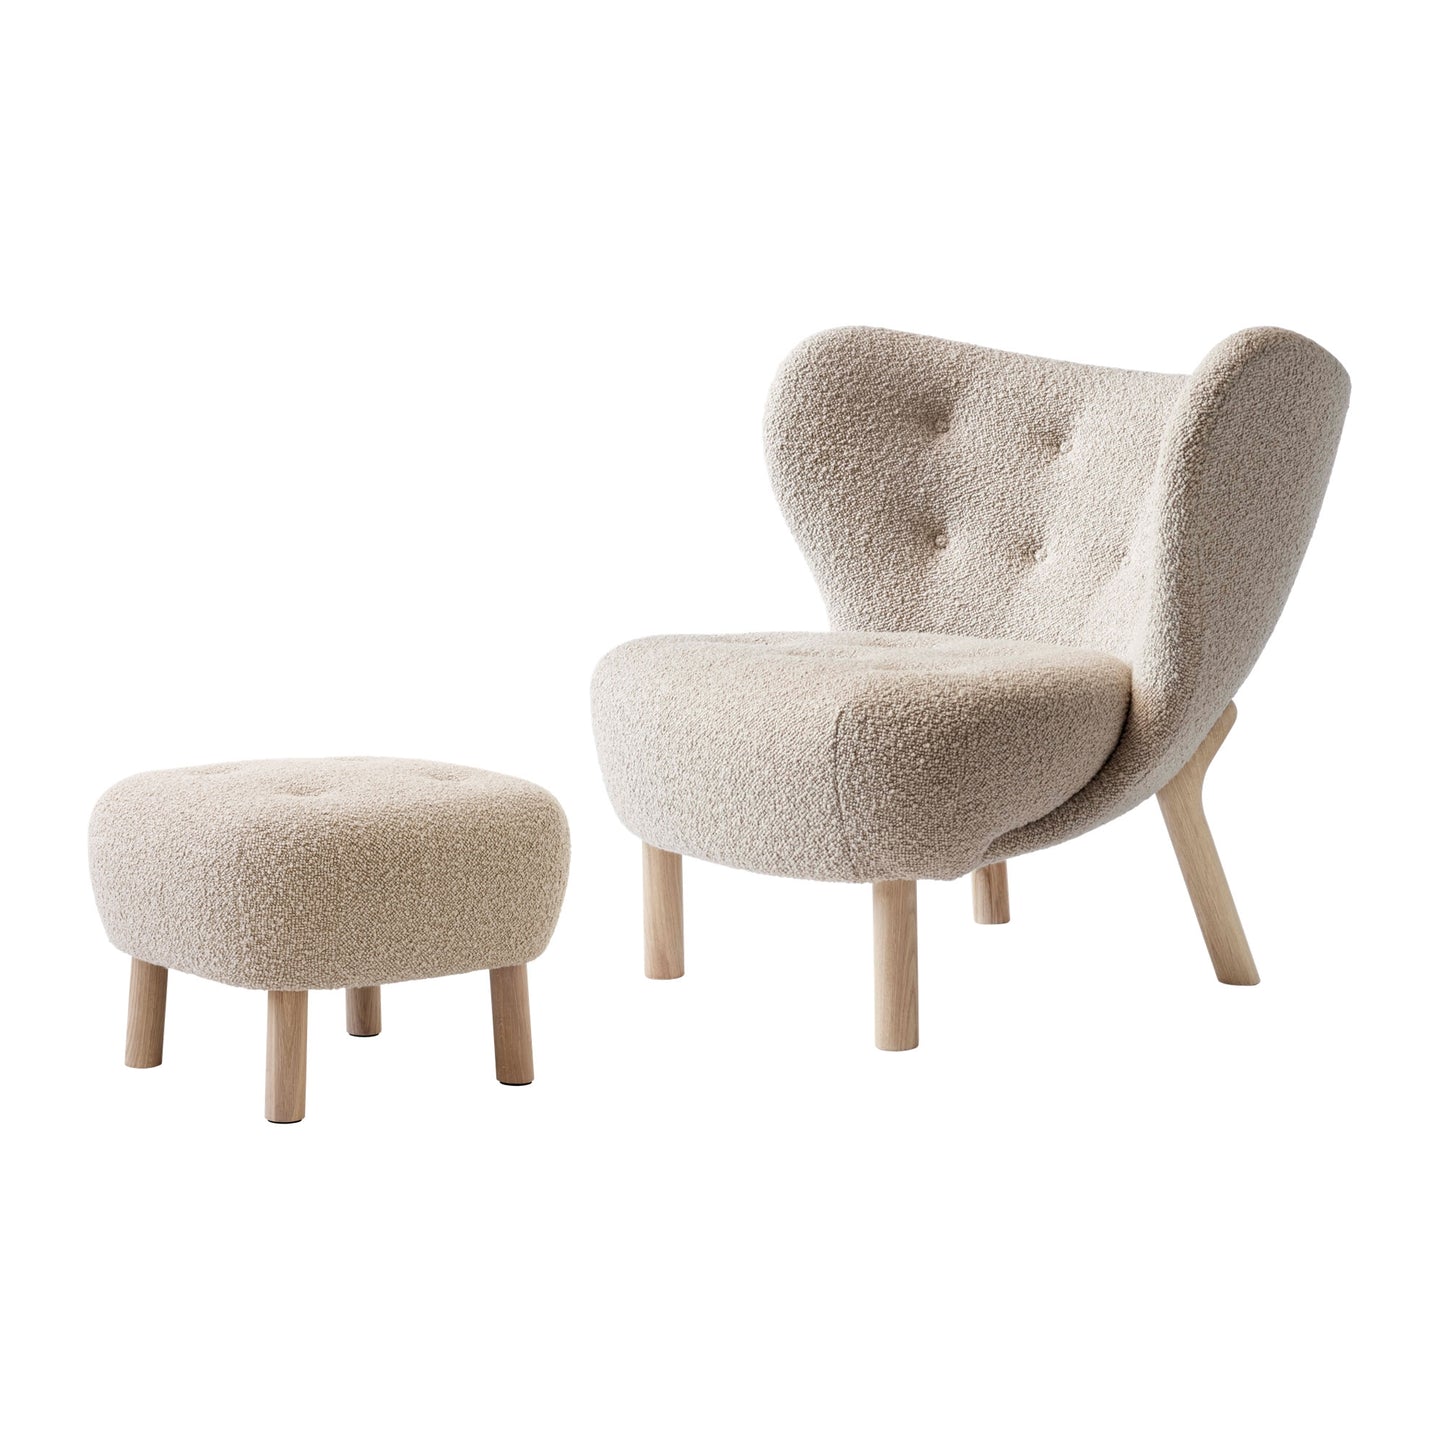 Little Petra VB1 Armchair with ATD1 Pouf by &tradition #Karakorum 003/White Oiled Oak Incl. ATD1 Puf